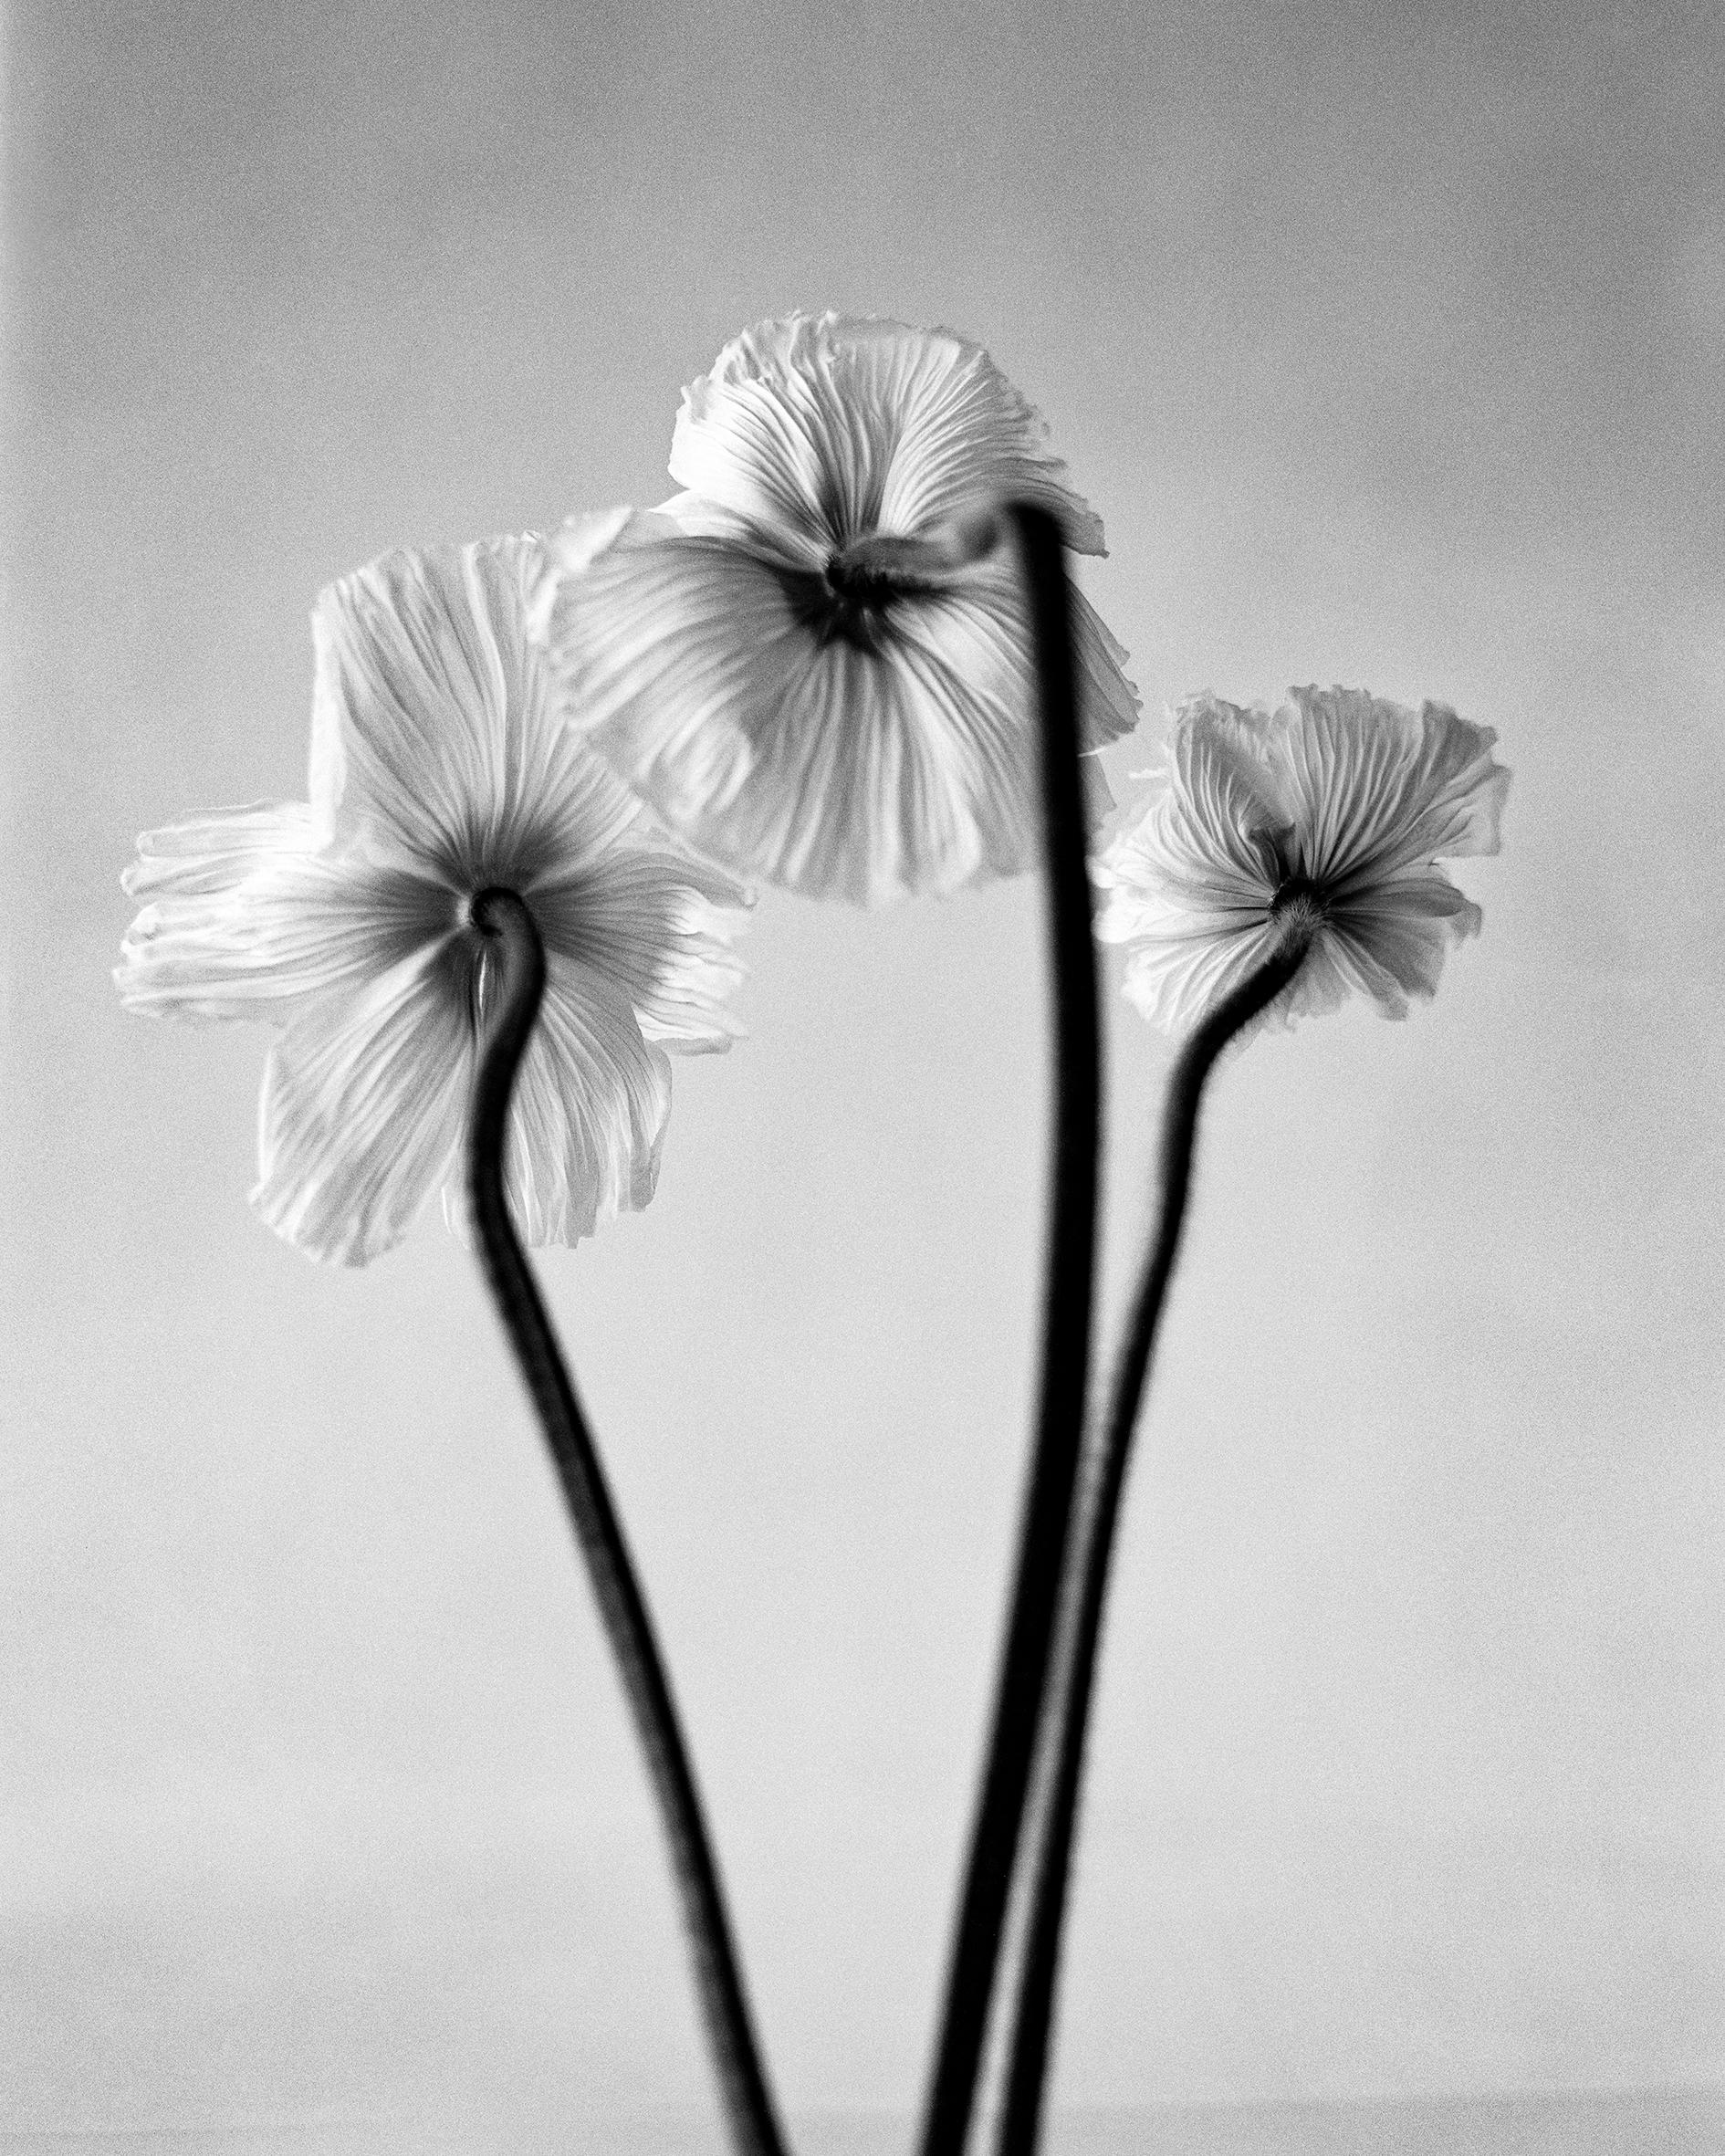 Ugne Pouwell Still-Life Photograph - Three poppies - black and white floral photography, limited edition of 20